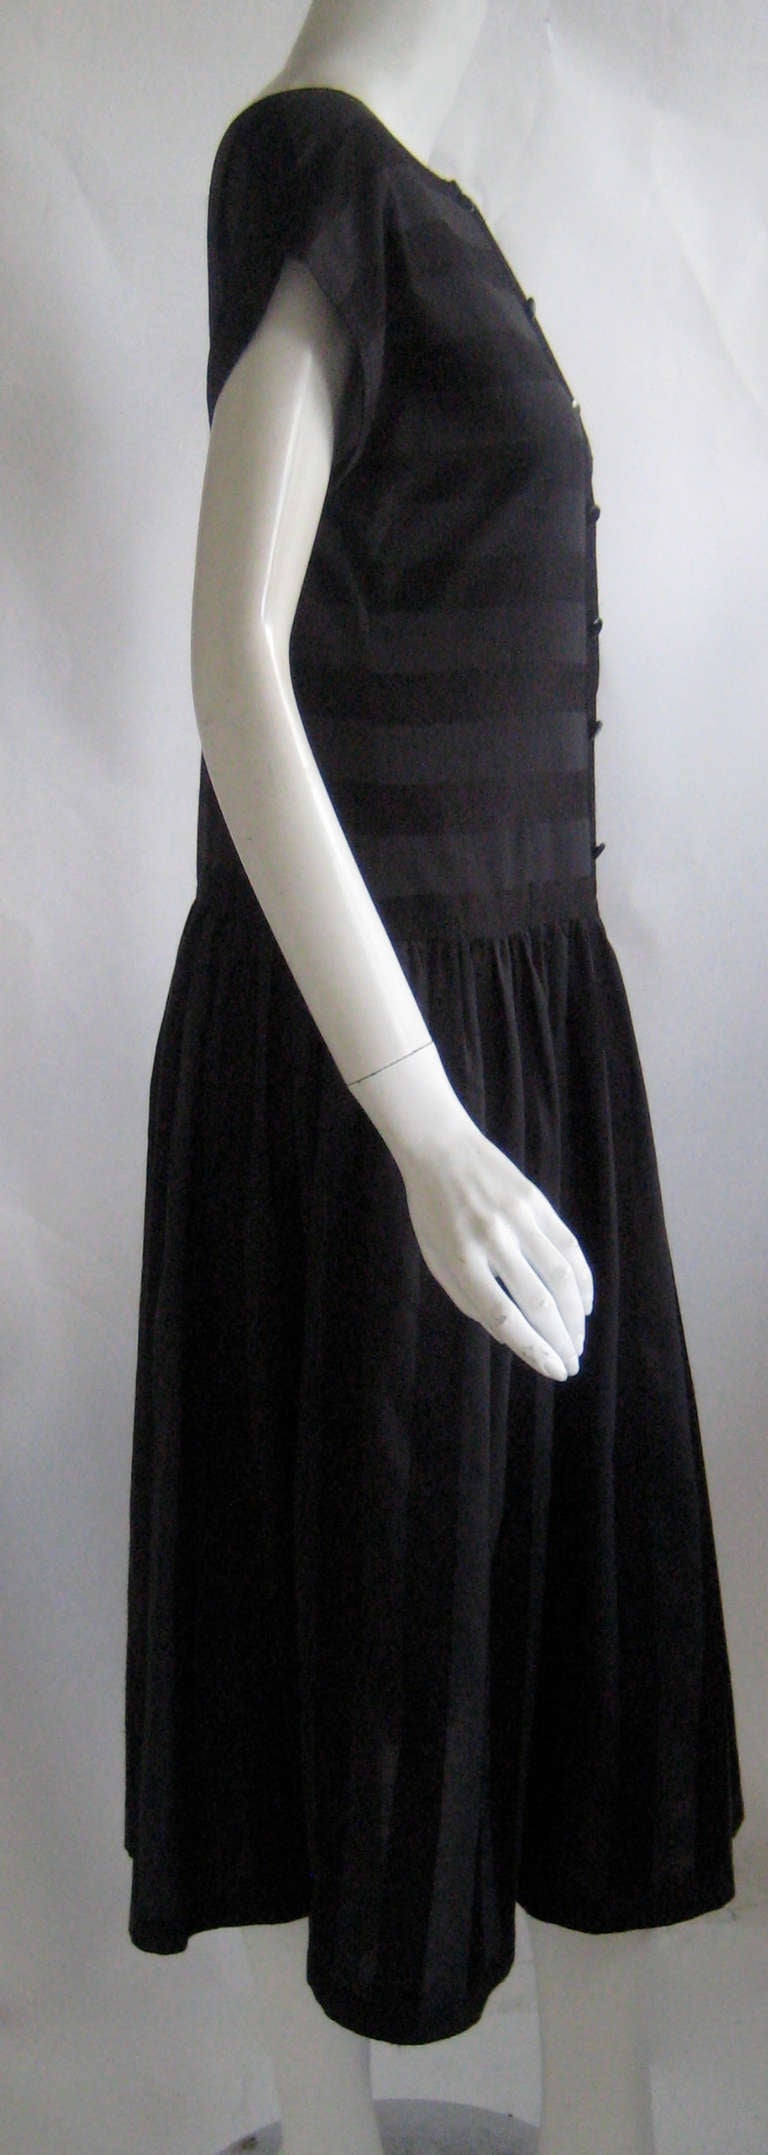 1980s Geoffrey Beene Little Black Dress In Excellent Condition For Sale In Chicago, IL